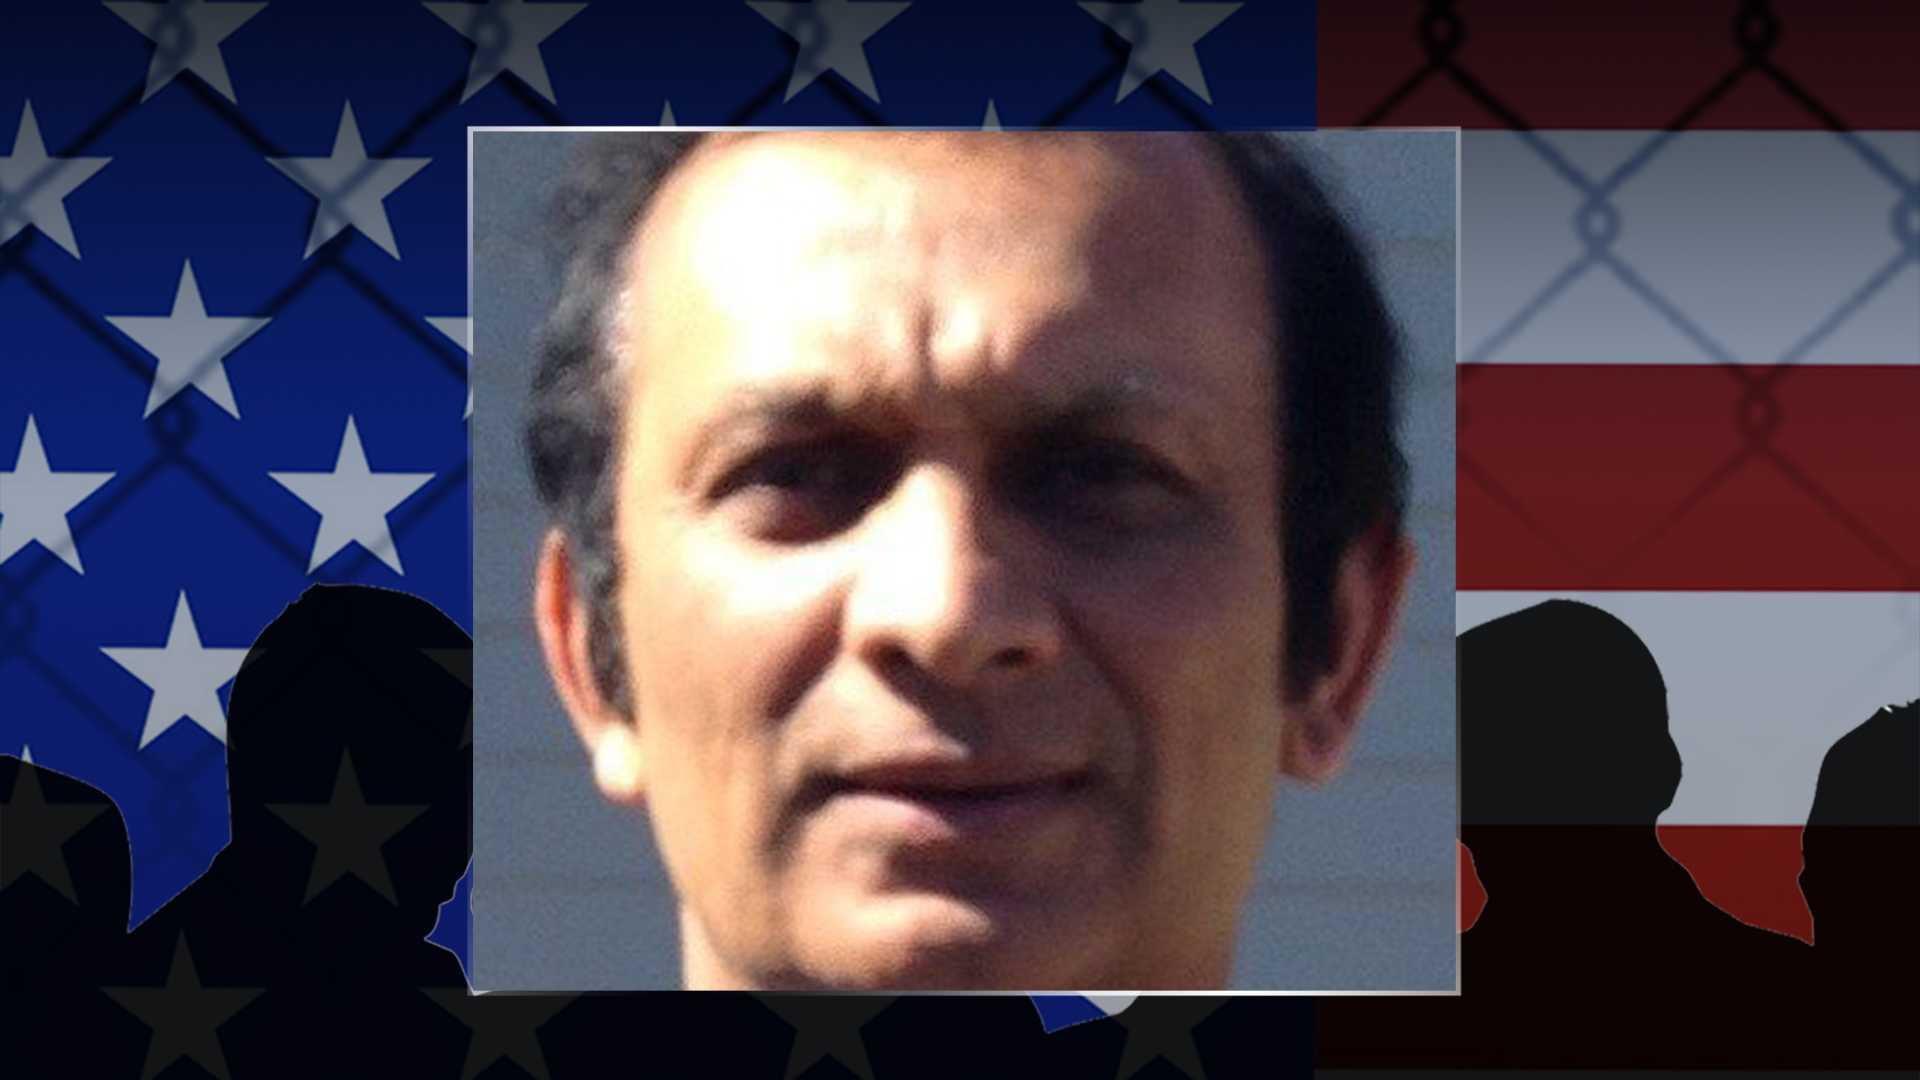 Family friend: Kansas father to be deported to Bangladesh